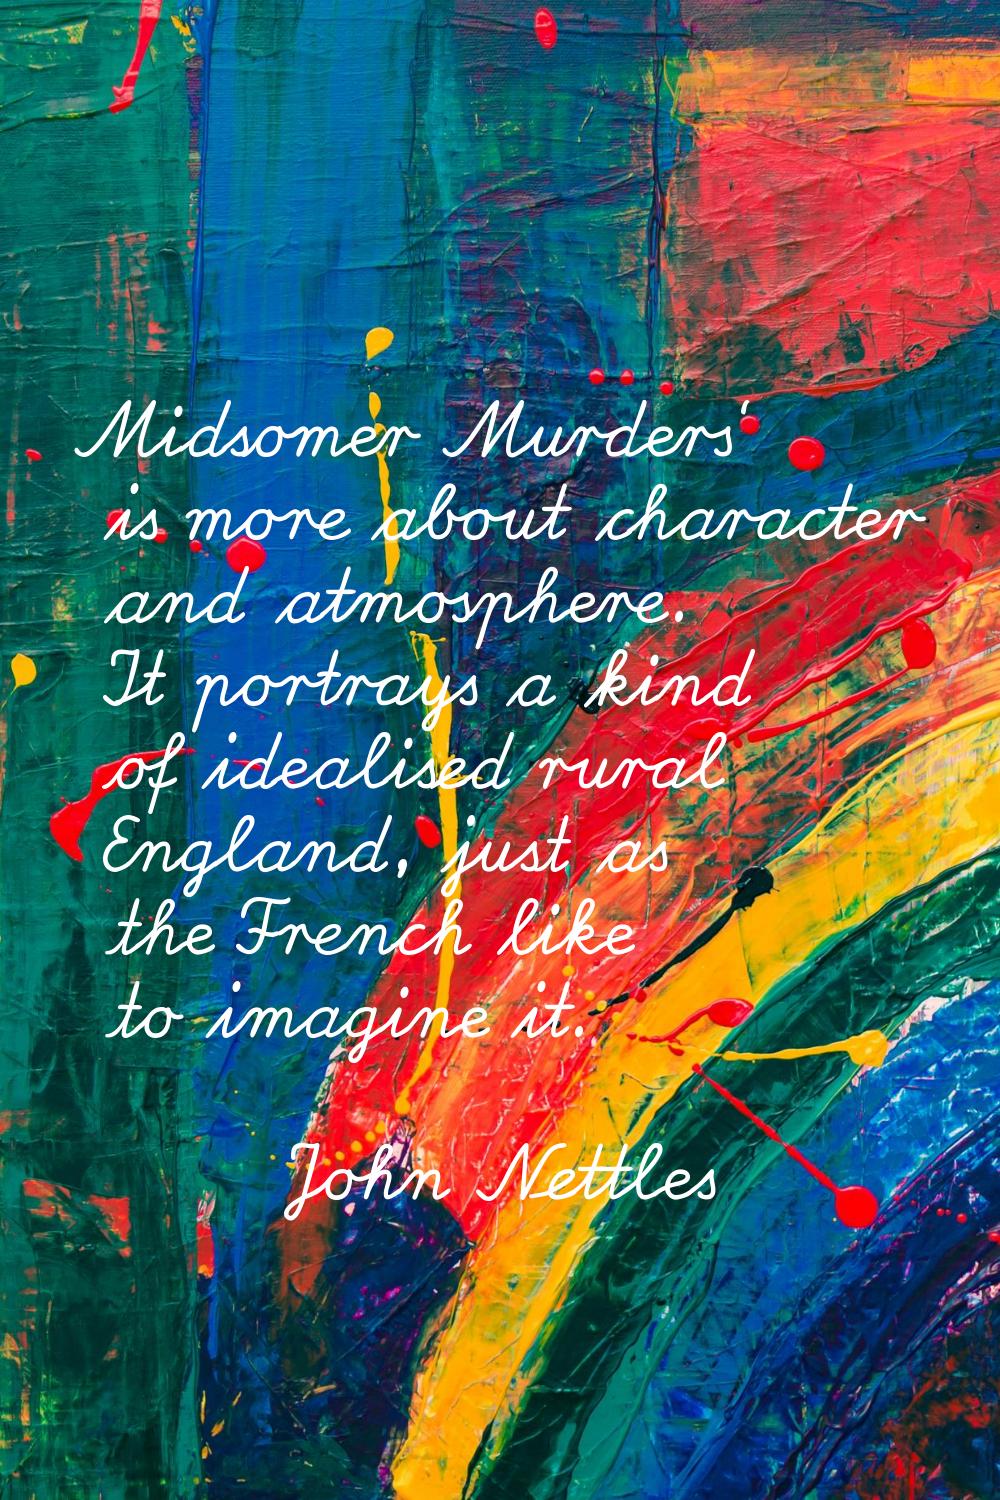 Midsomer Murders' is more about character and atmosphere. It portrays a kind of idealised rural Eng